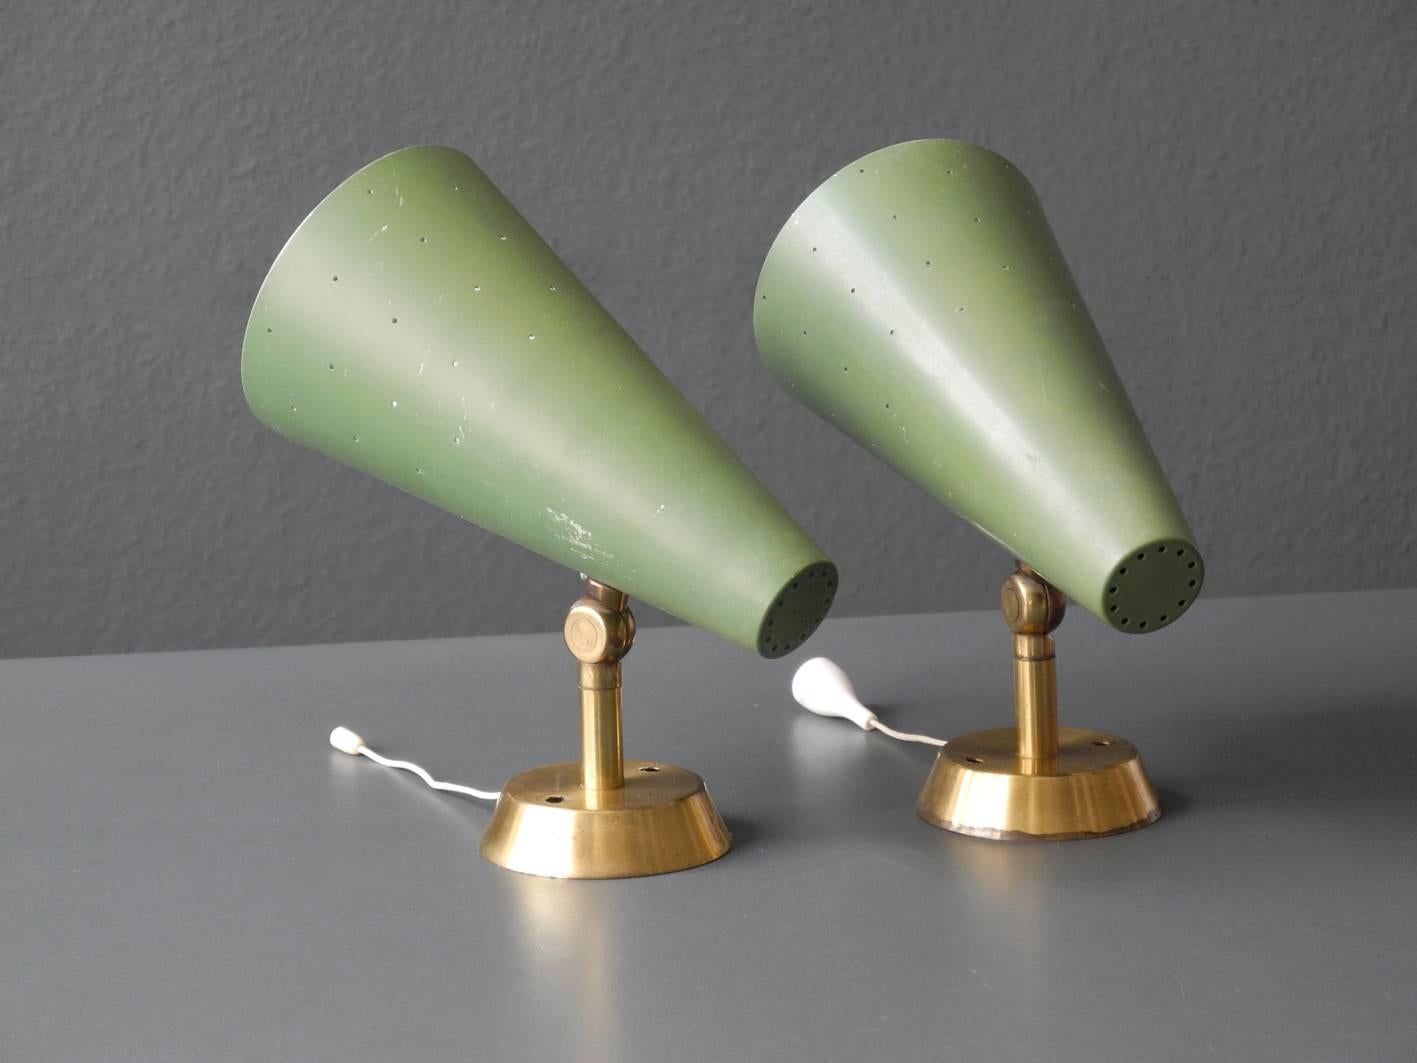 Mid-Century Modern Pair of Midcentury Perforated Metal Sconces Made of Brass and Aluminum, Italy